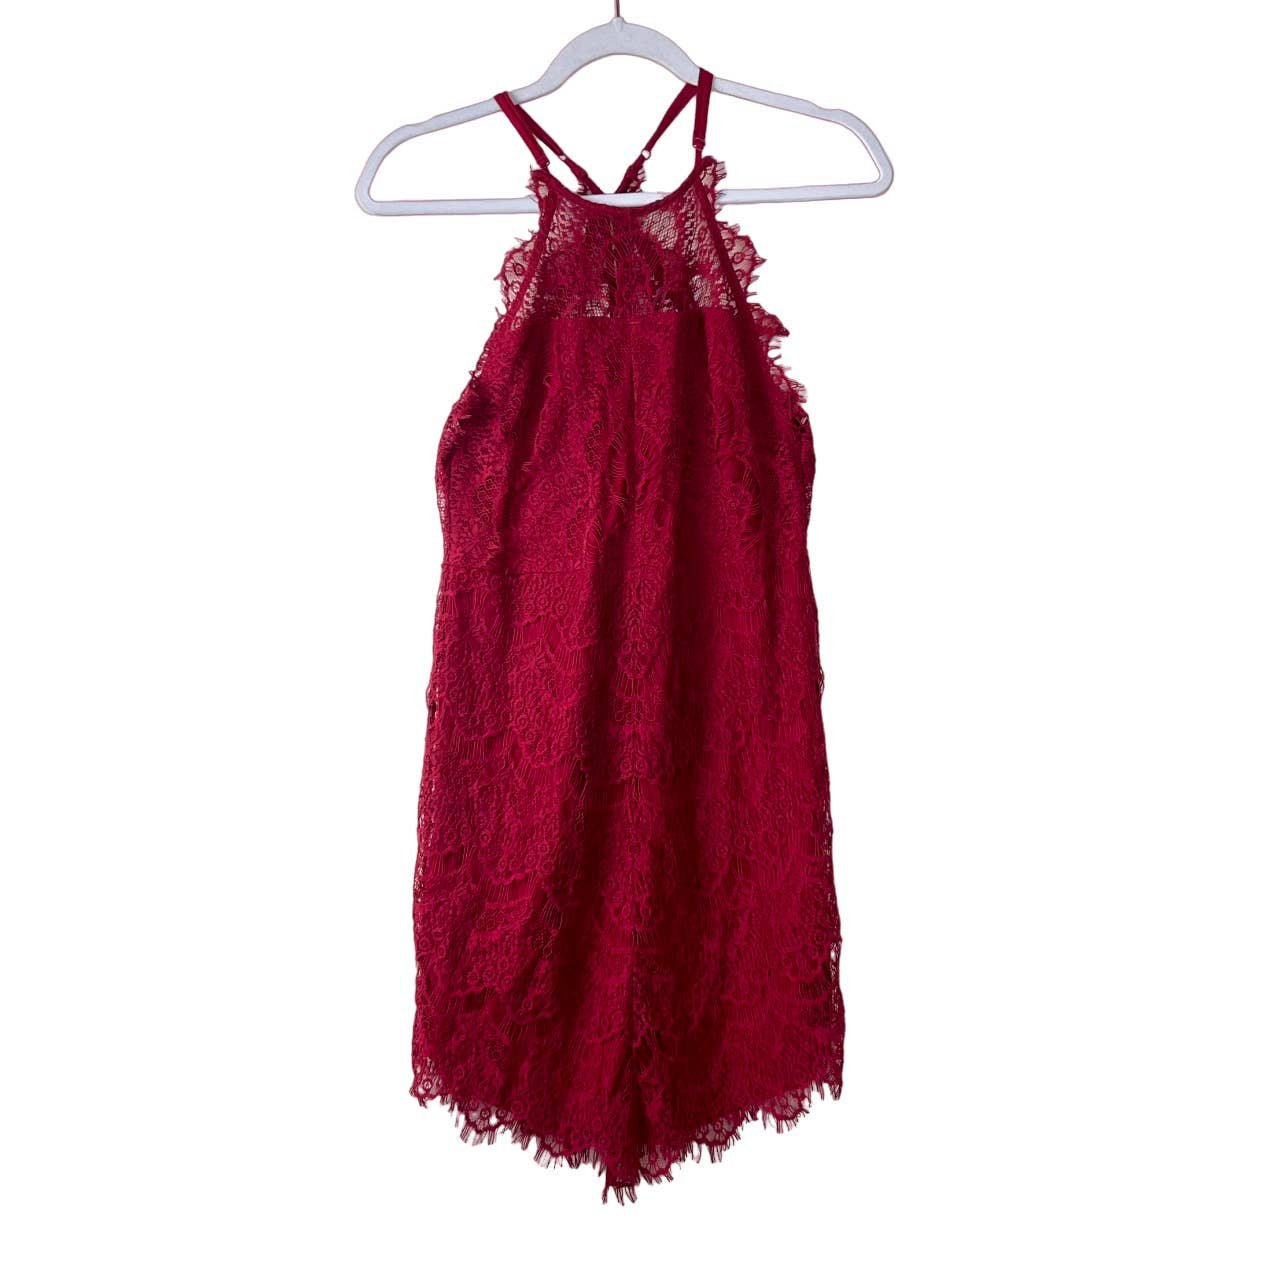 Intimately Free People Red Lace Halter Dress Size Small